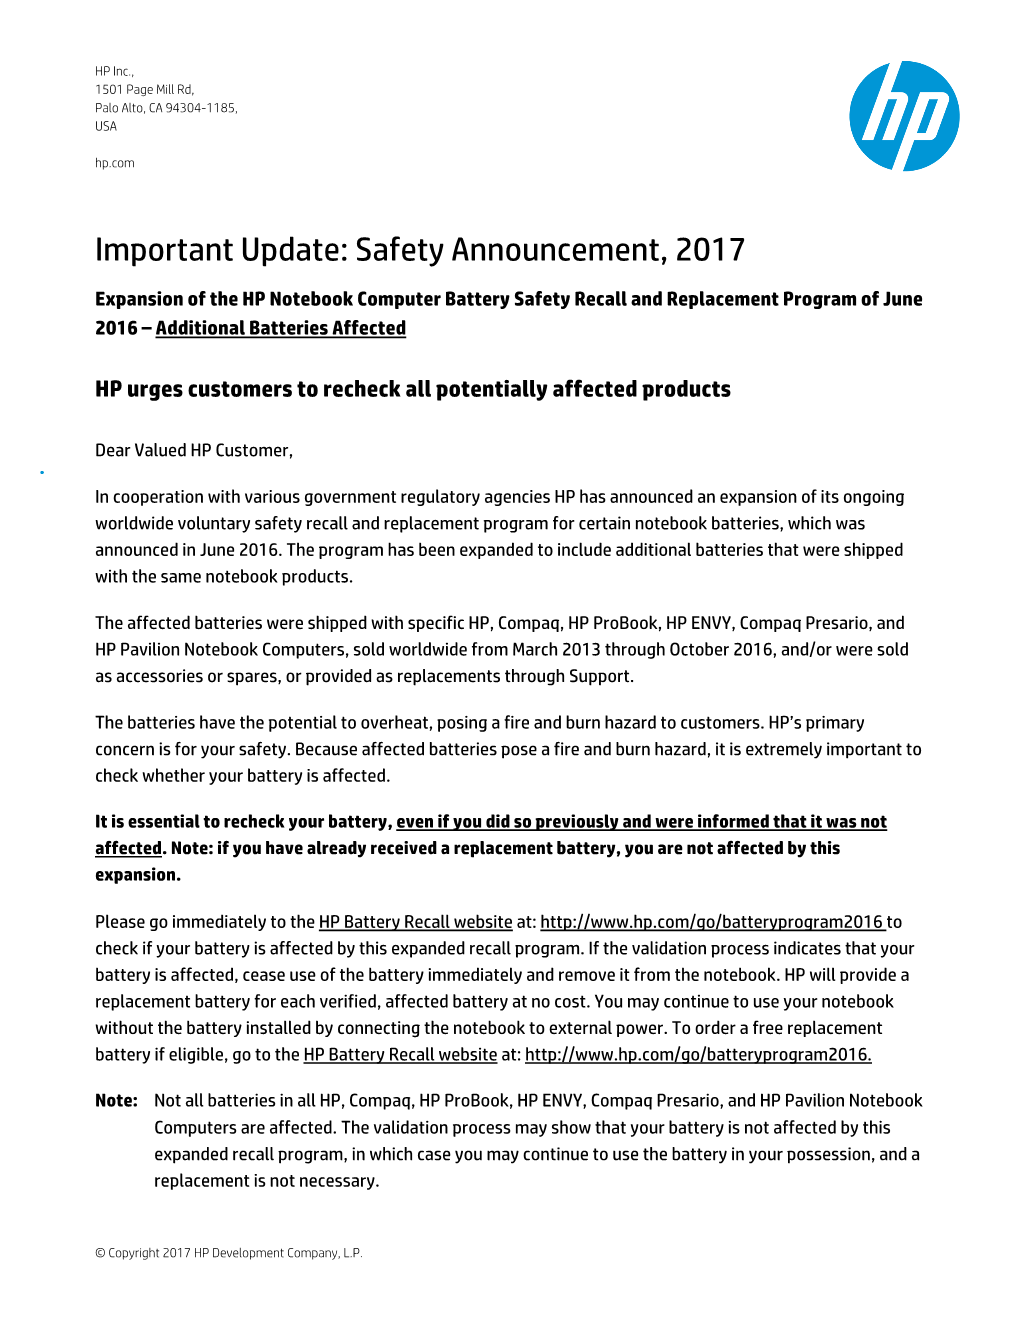 Safety Announcement, 2017